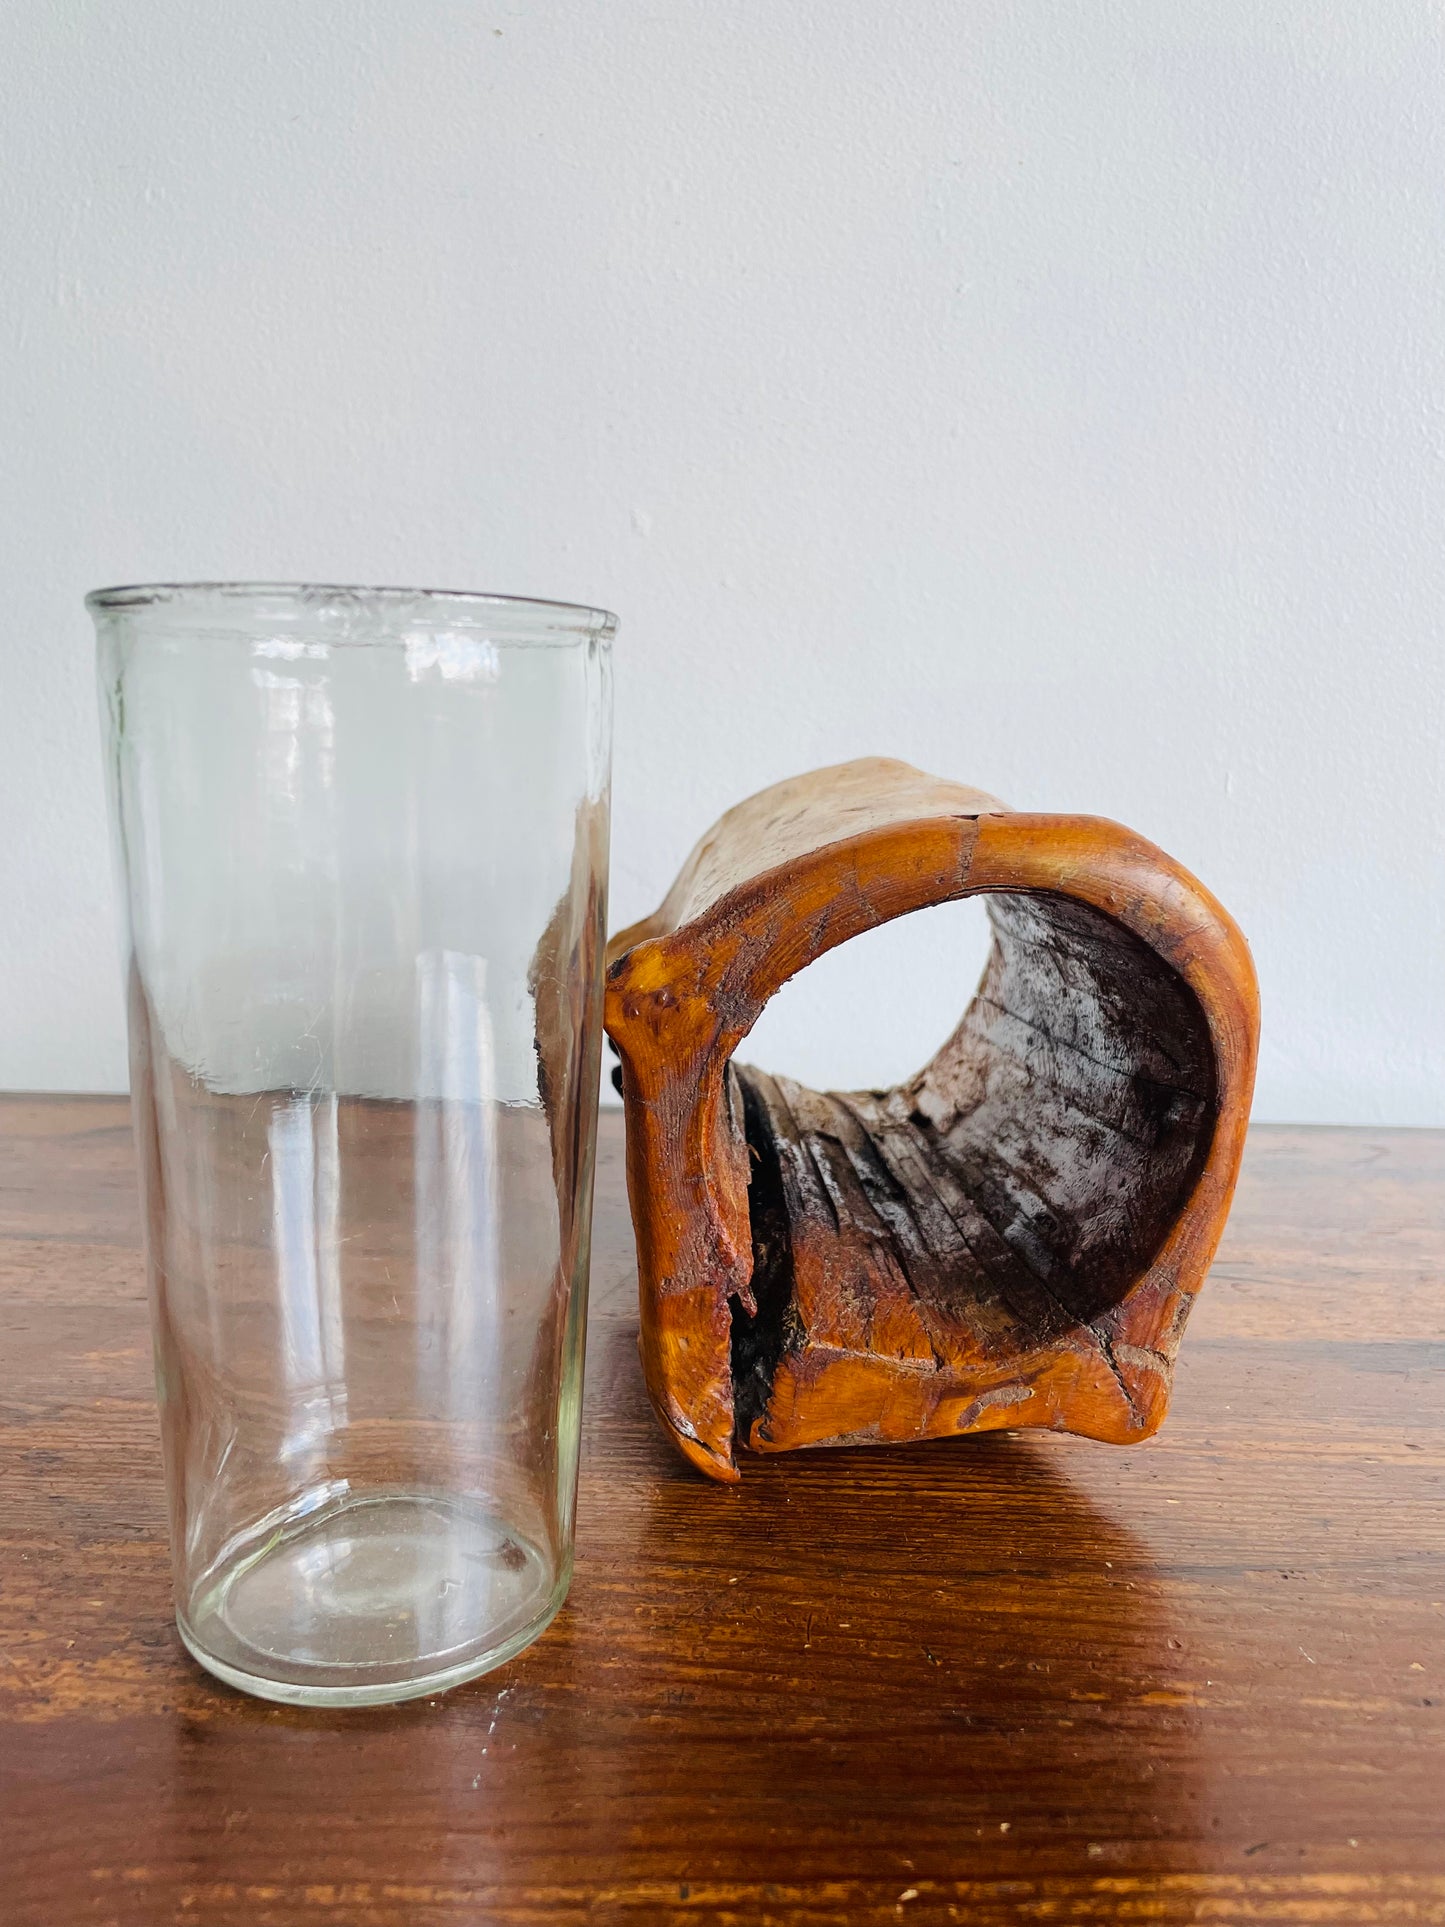 Incredibly Unique Vase made from a Tree Branch with Glass Canister Inside